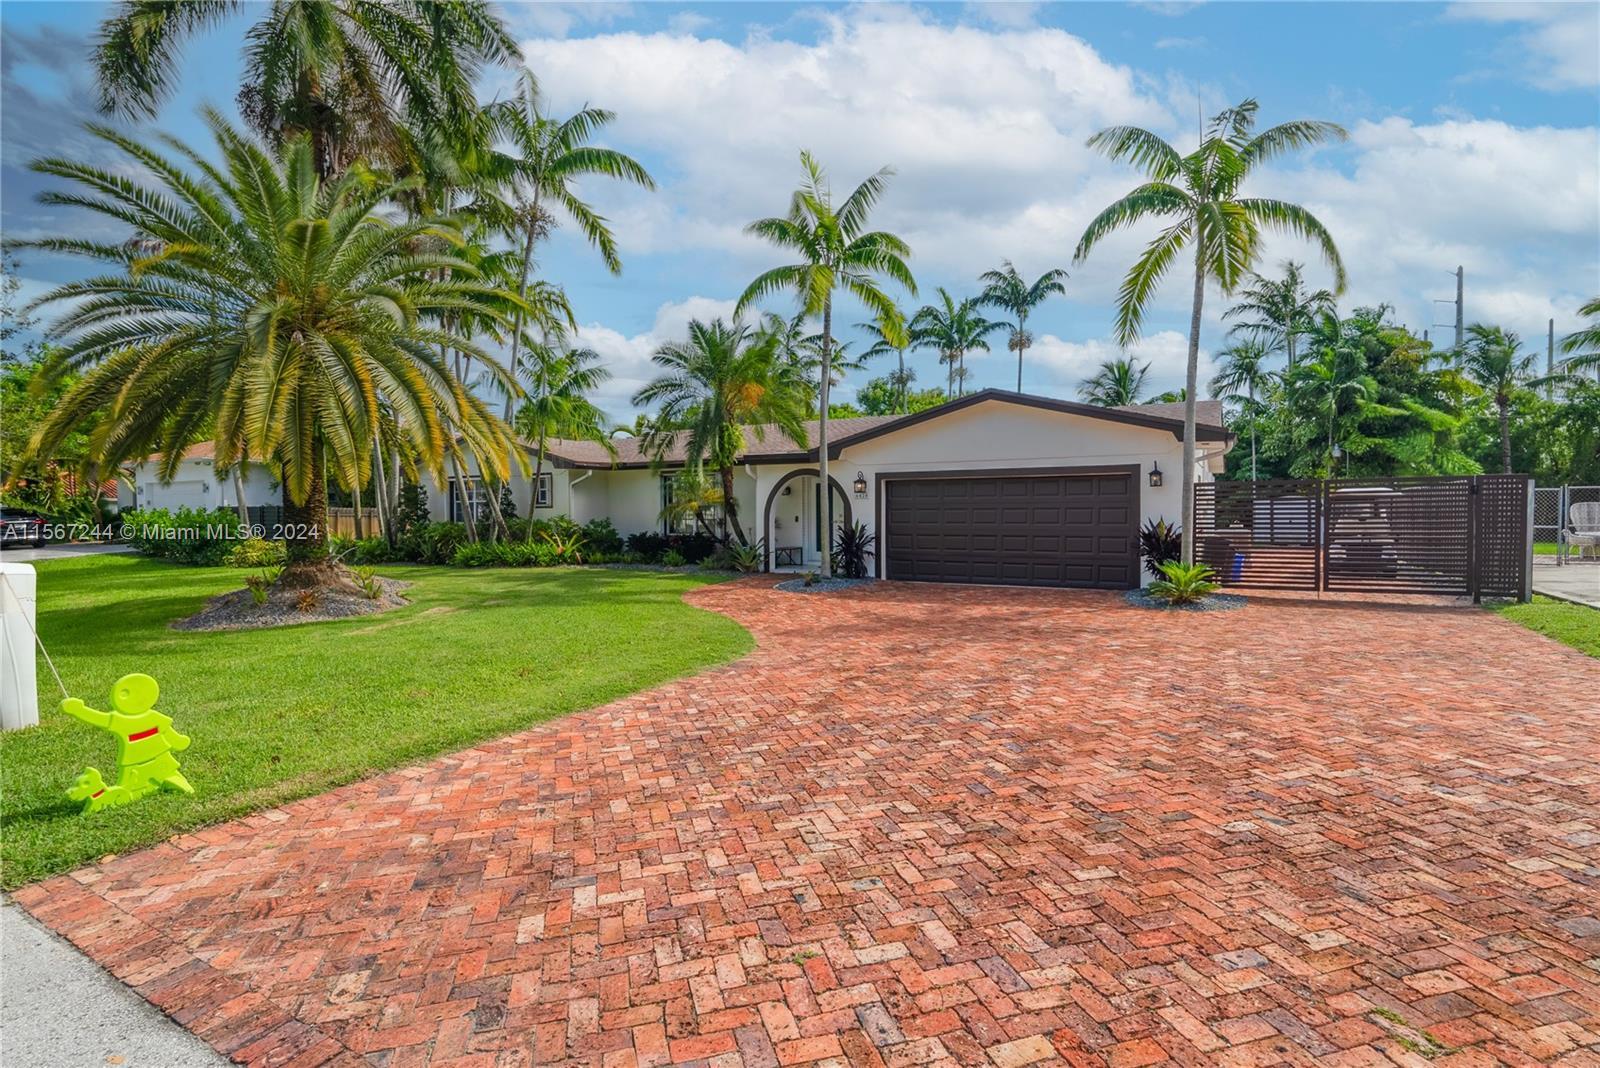 Remodeled Home in Exclusive Guarded Kings Bay. NO HOA, 3 spacious bedrooms, 2 fully updated bathroom